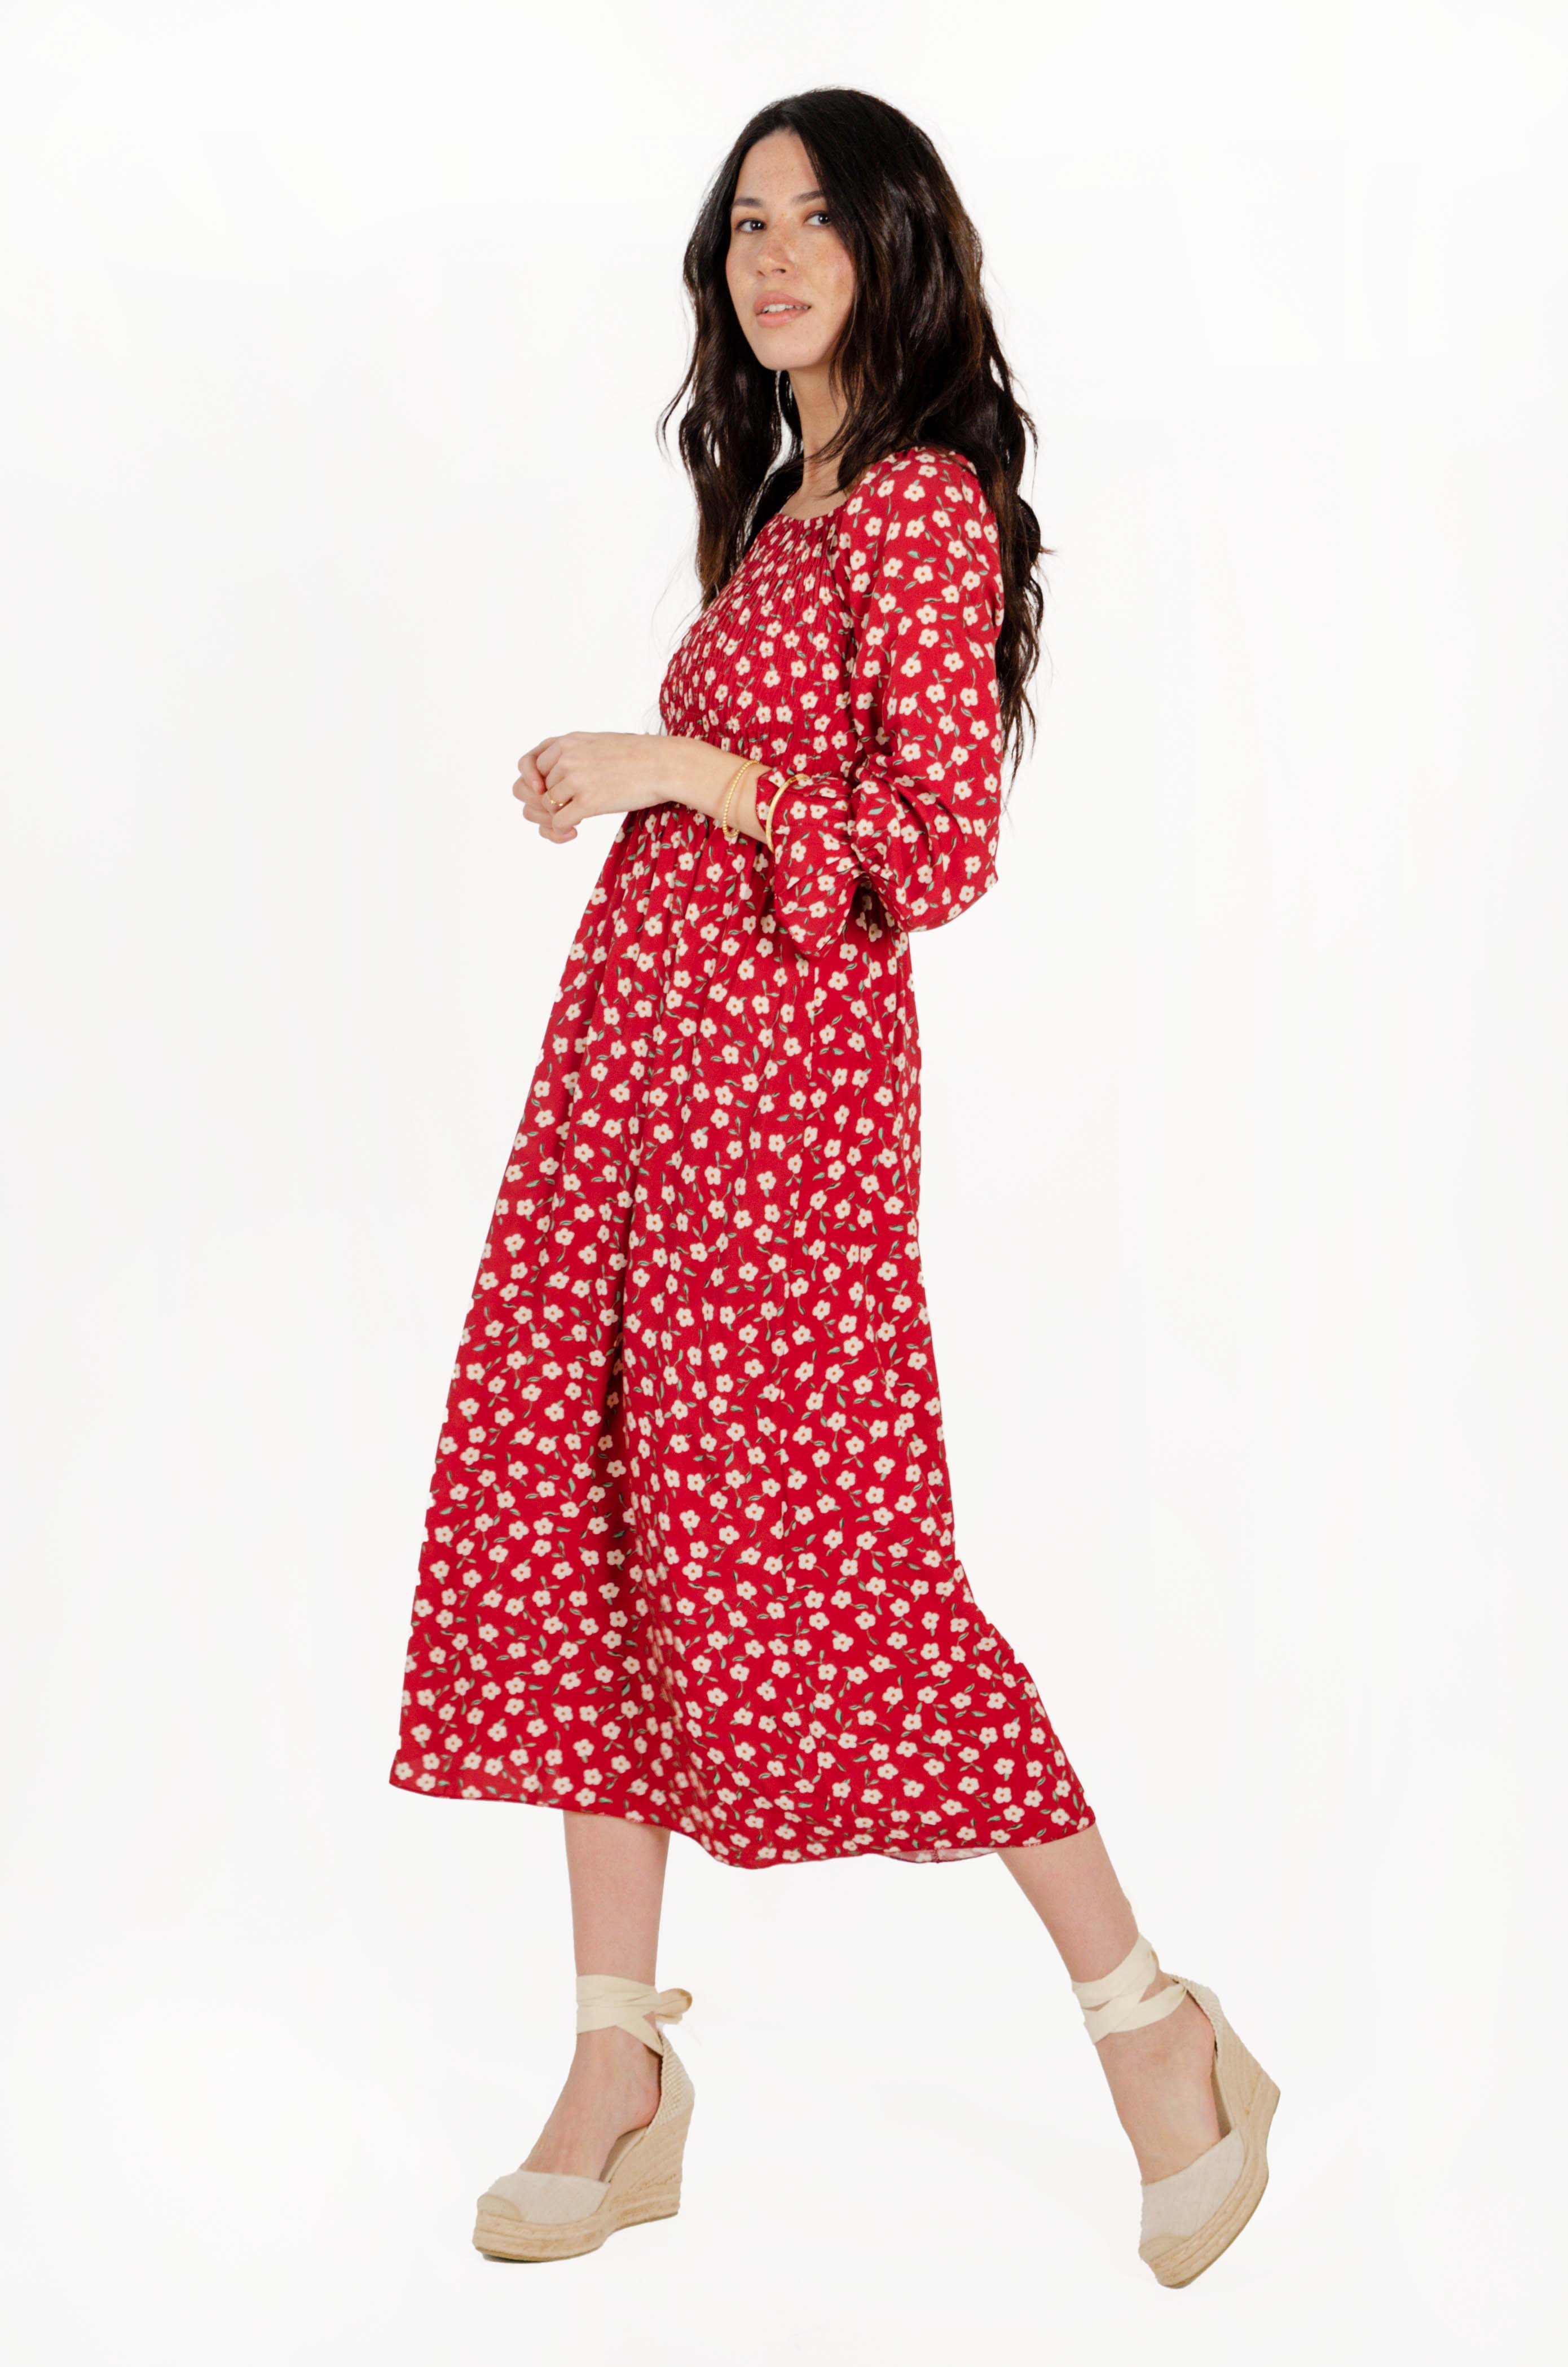 ALICIA DRESS // RED FLOWERS